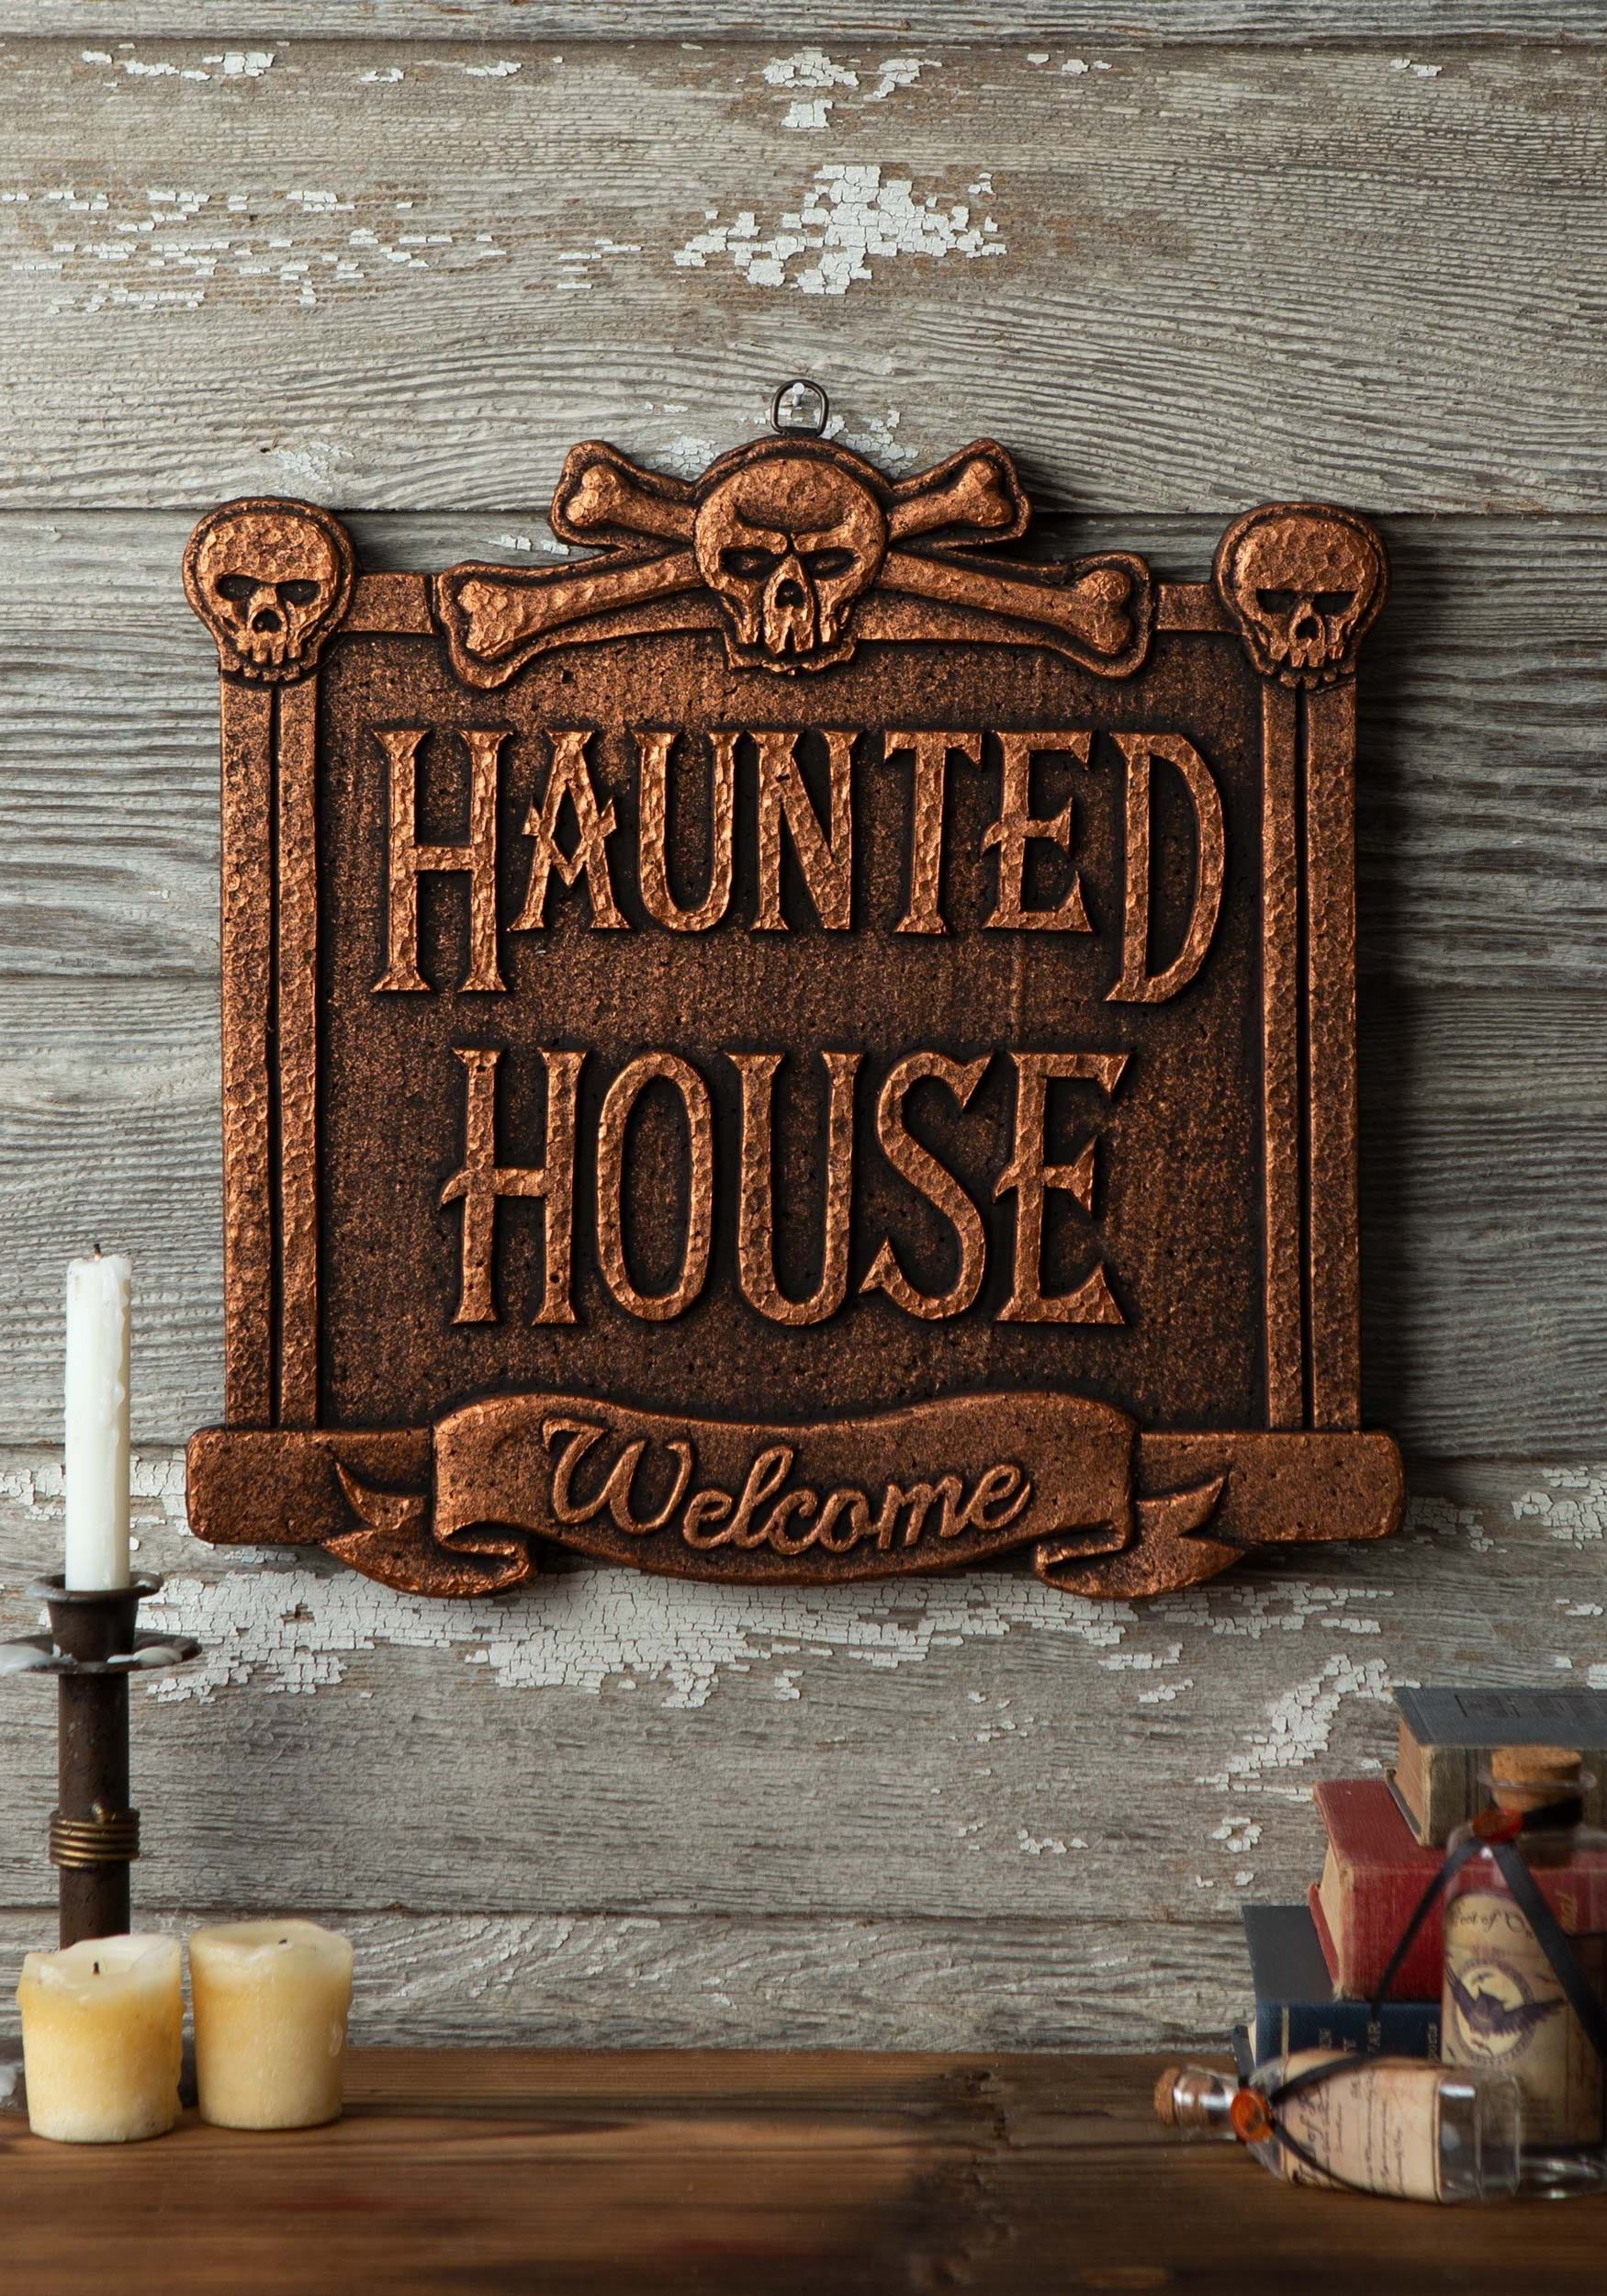 13" Haunted House Sign Decoration